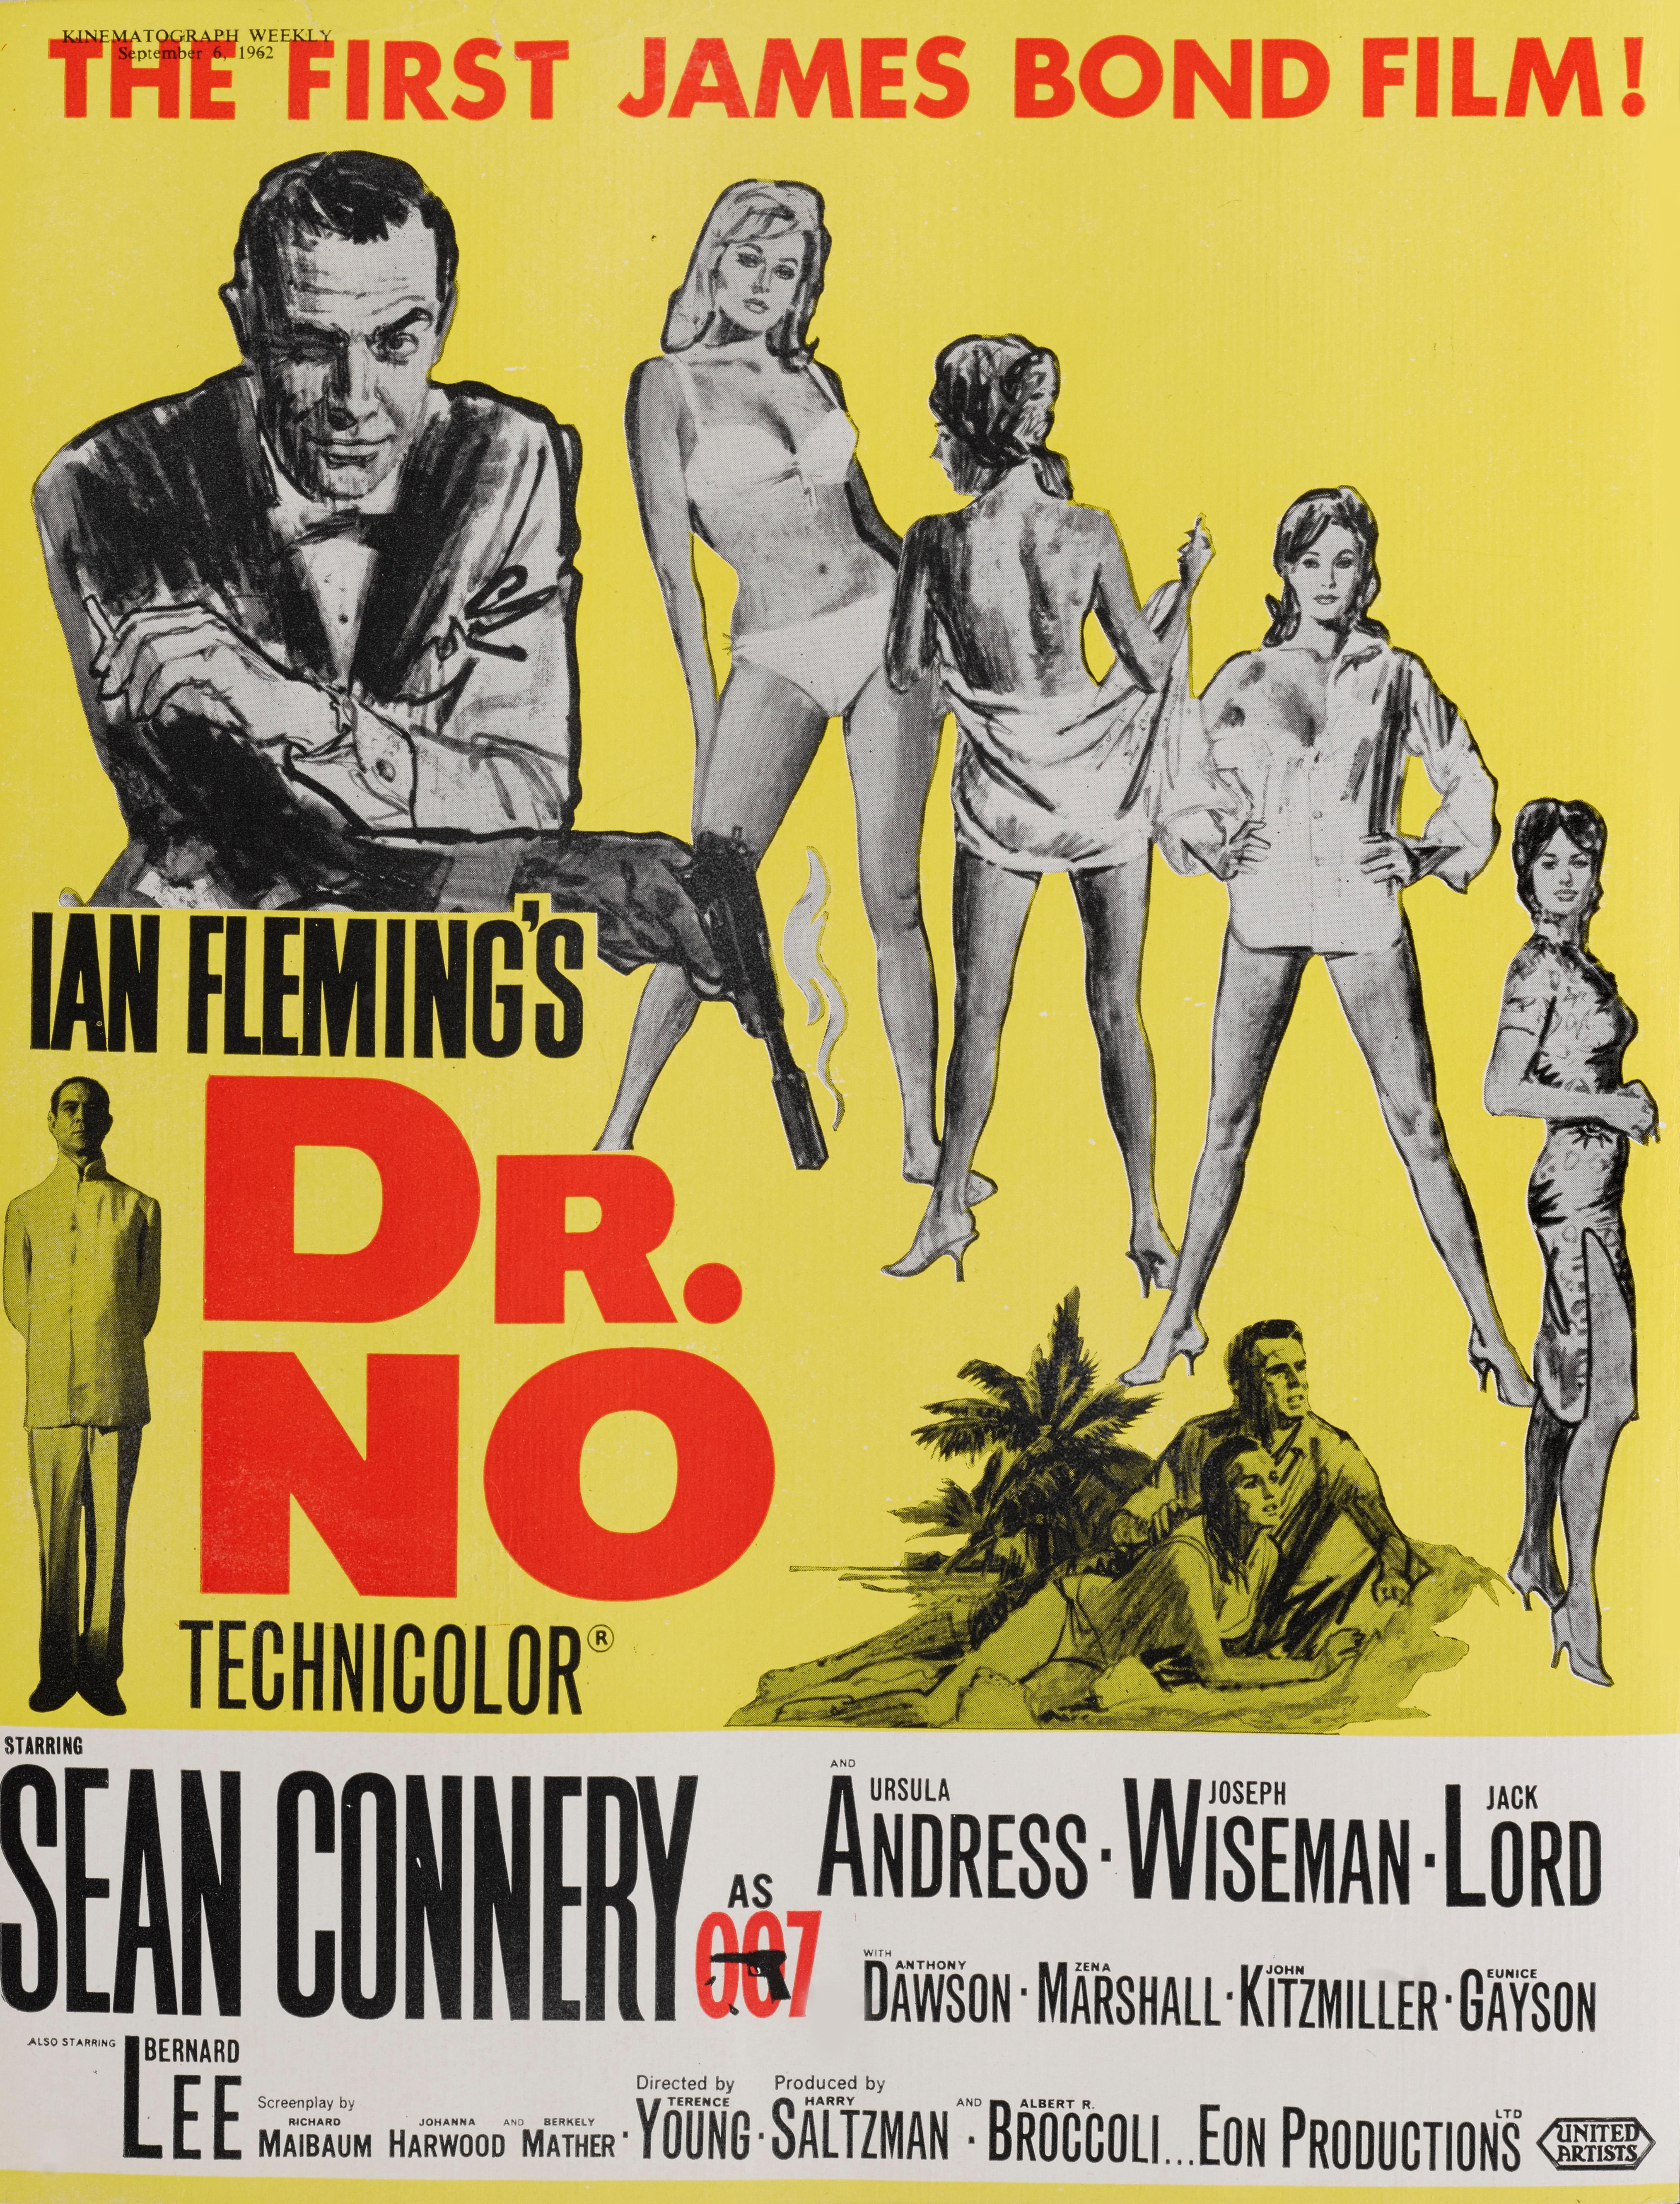 Original British Trade Advertisement from Kinematograph Weekly September 6th 1962
Dr. No starring Sean Connery is the first James Bond film. Based on the 1958 novel of the same name by Ian Fleming. The film was the first of a successful series of